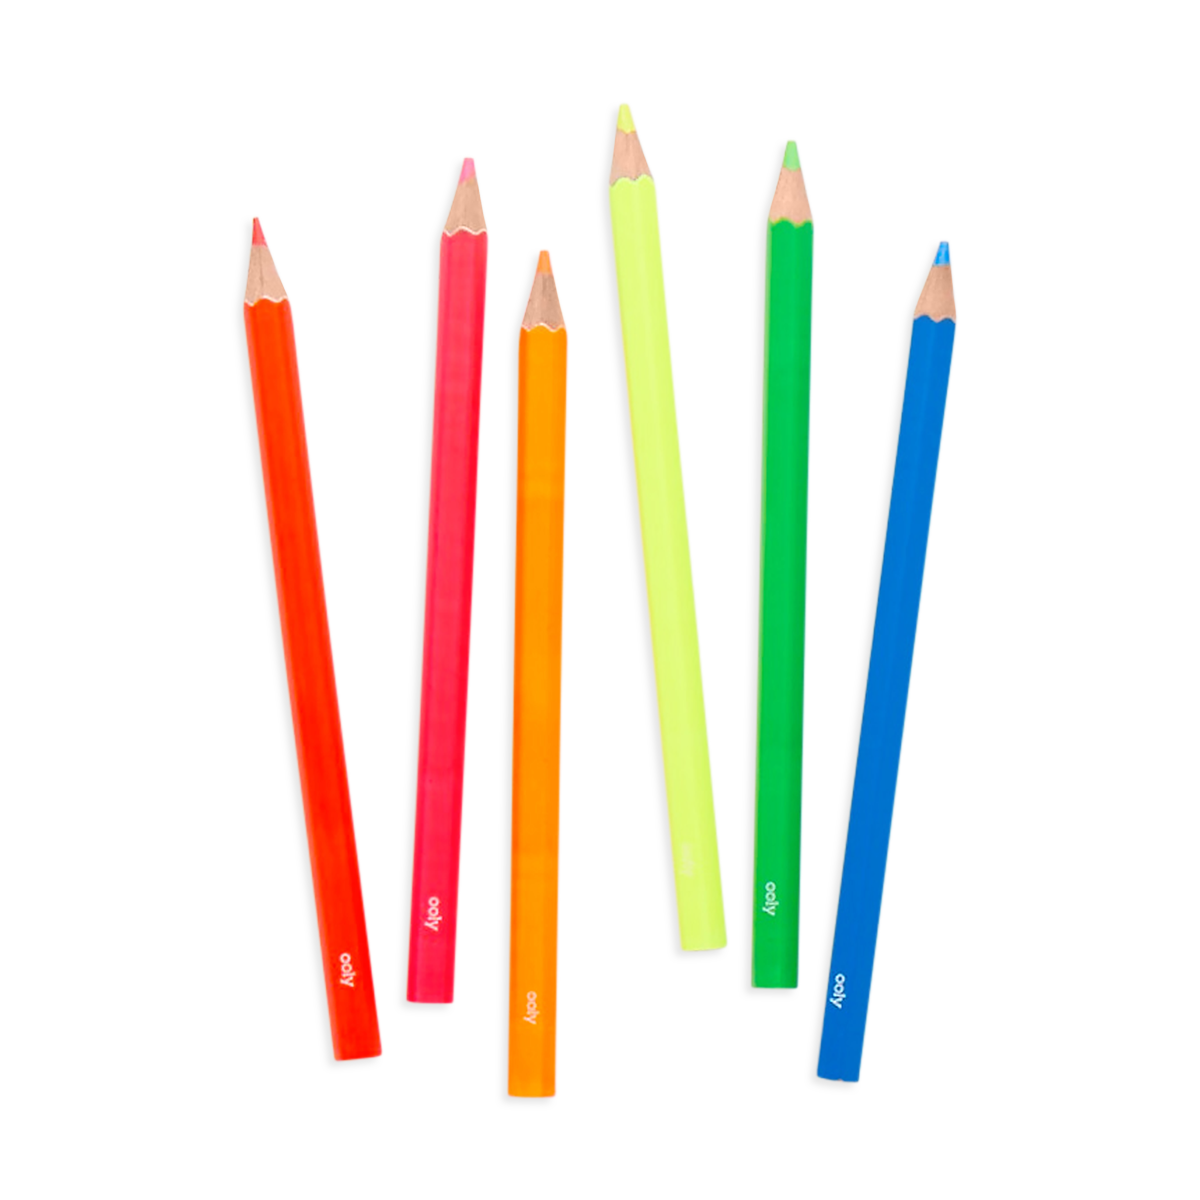 OOLY Jumbo Brights Neon Colored Pencils out of packaing